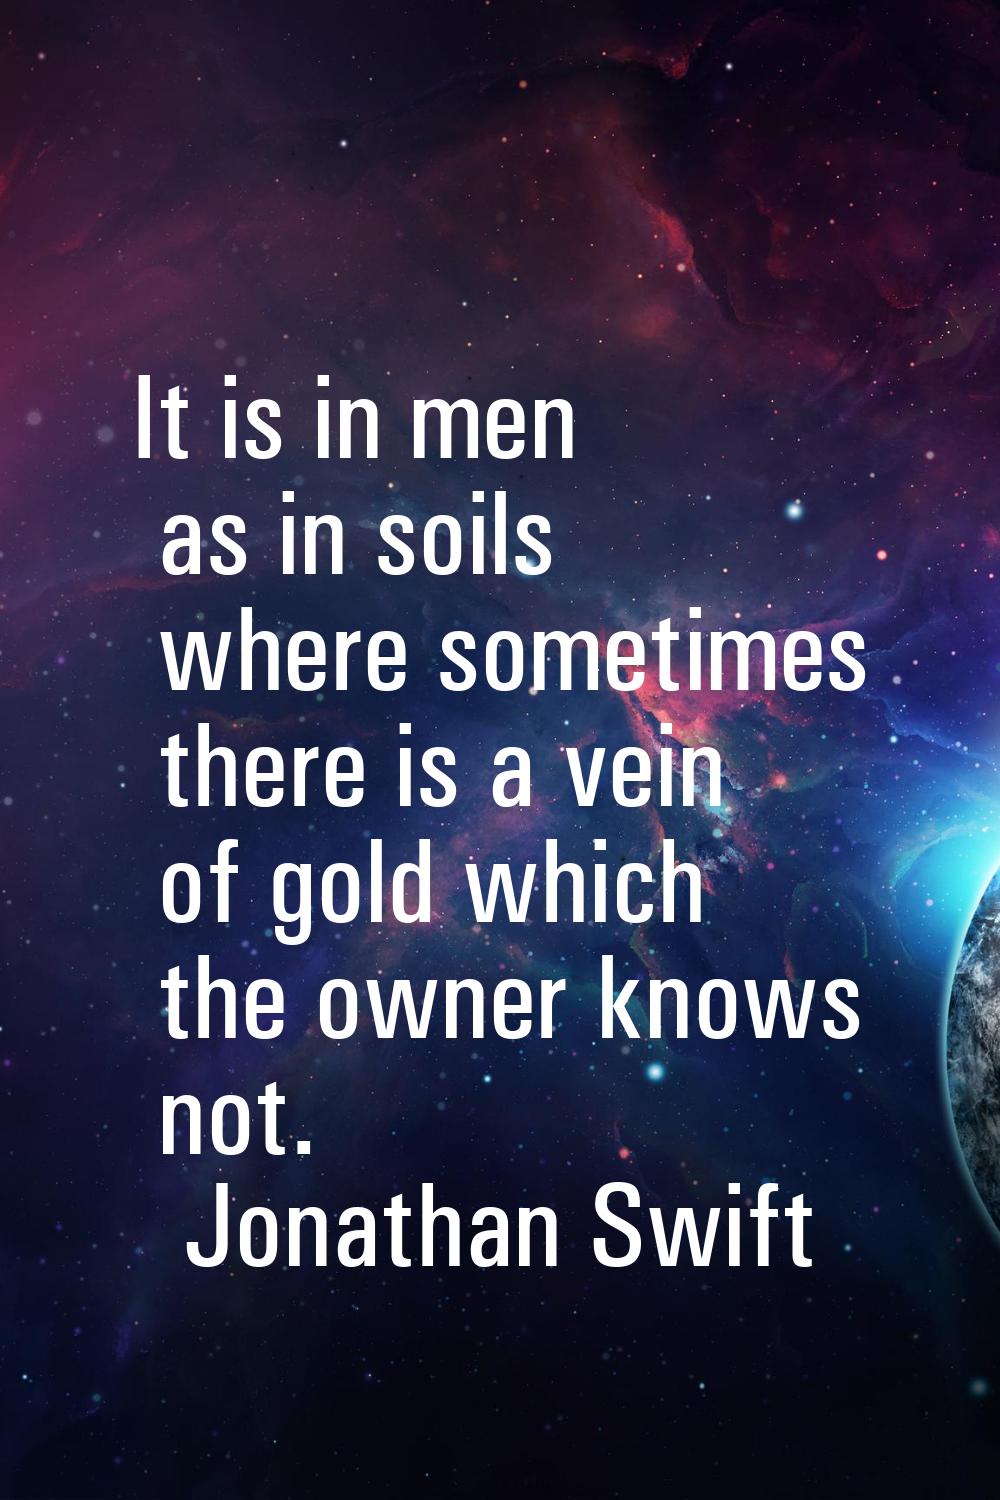 It is in men as in soils where sometimes there is a vein of gold which the owner knows not.